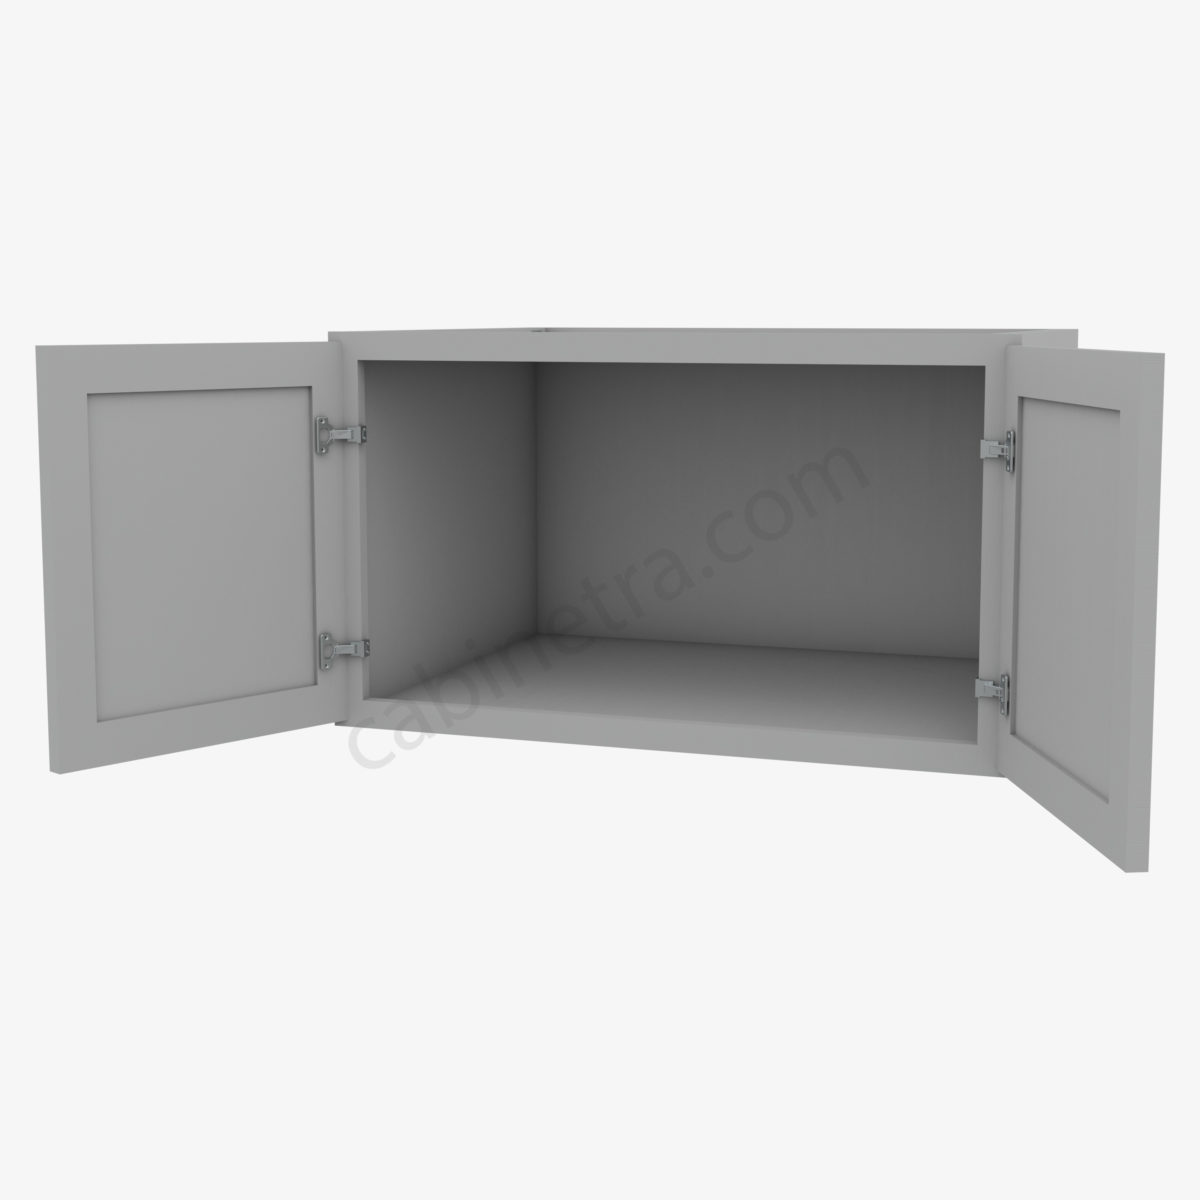 AB W301824B 5 Forevermark Lait Gray Shaker Cabinetra scaled